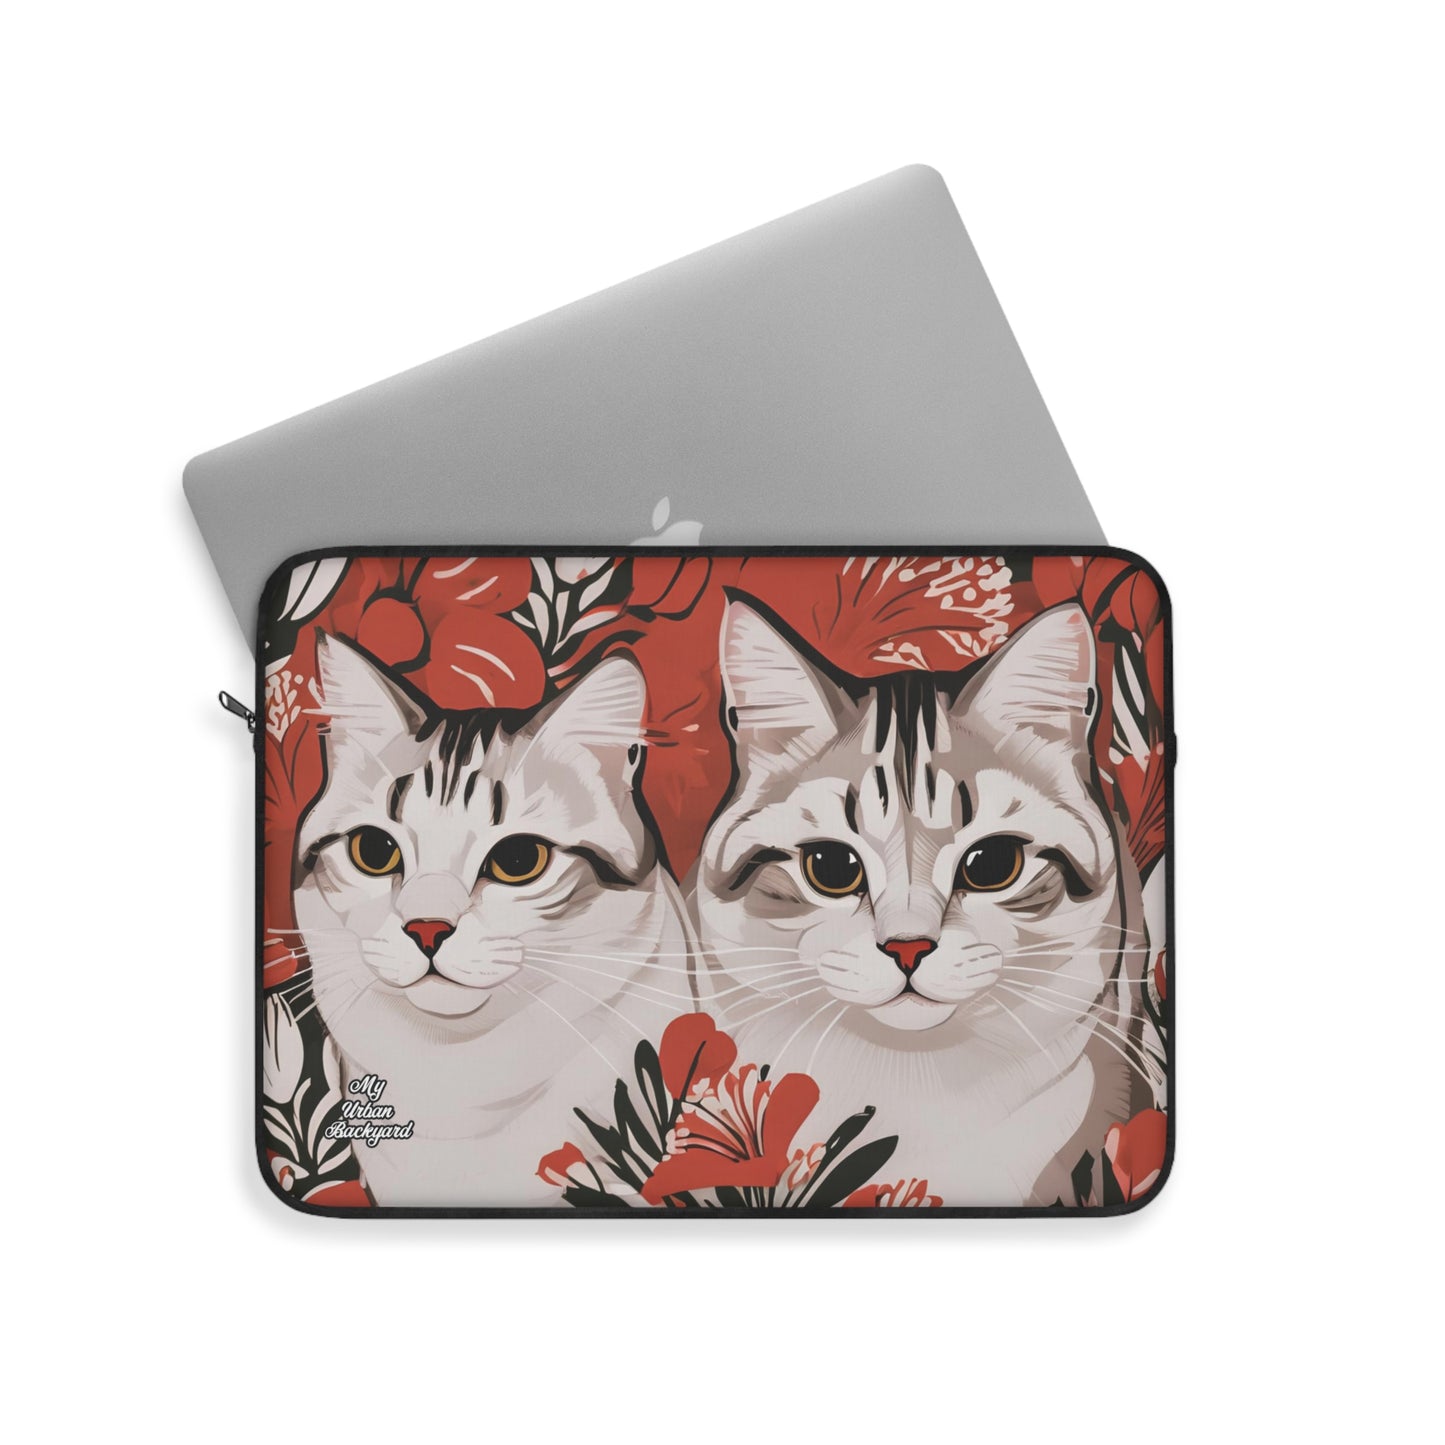 White Cats, Laptop Carrying Case, Top Loading Sleeve for School or Work